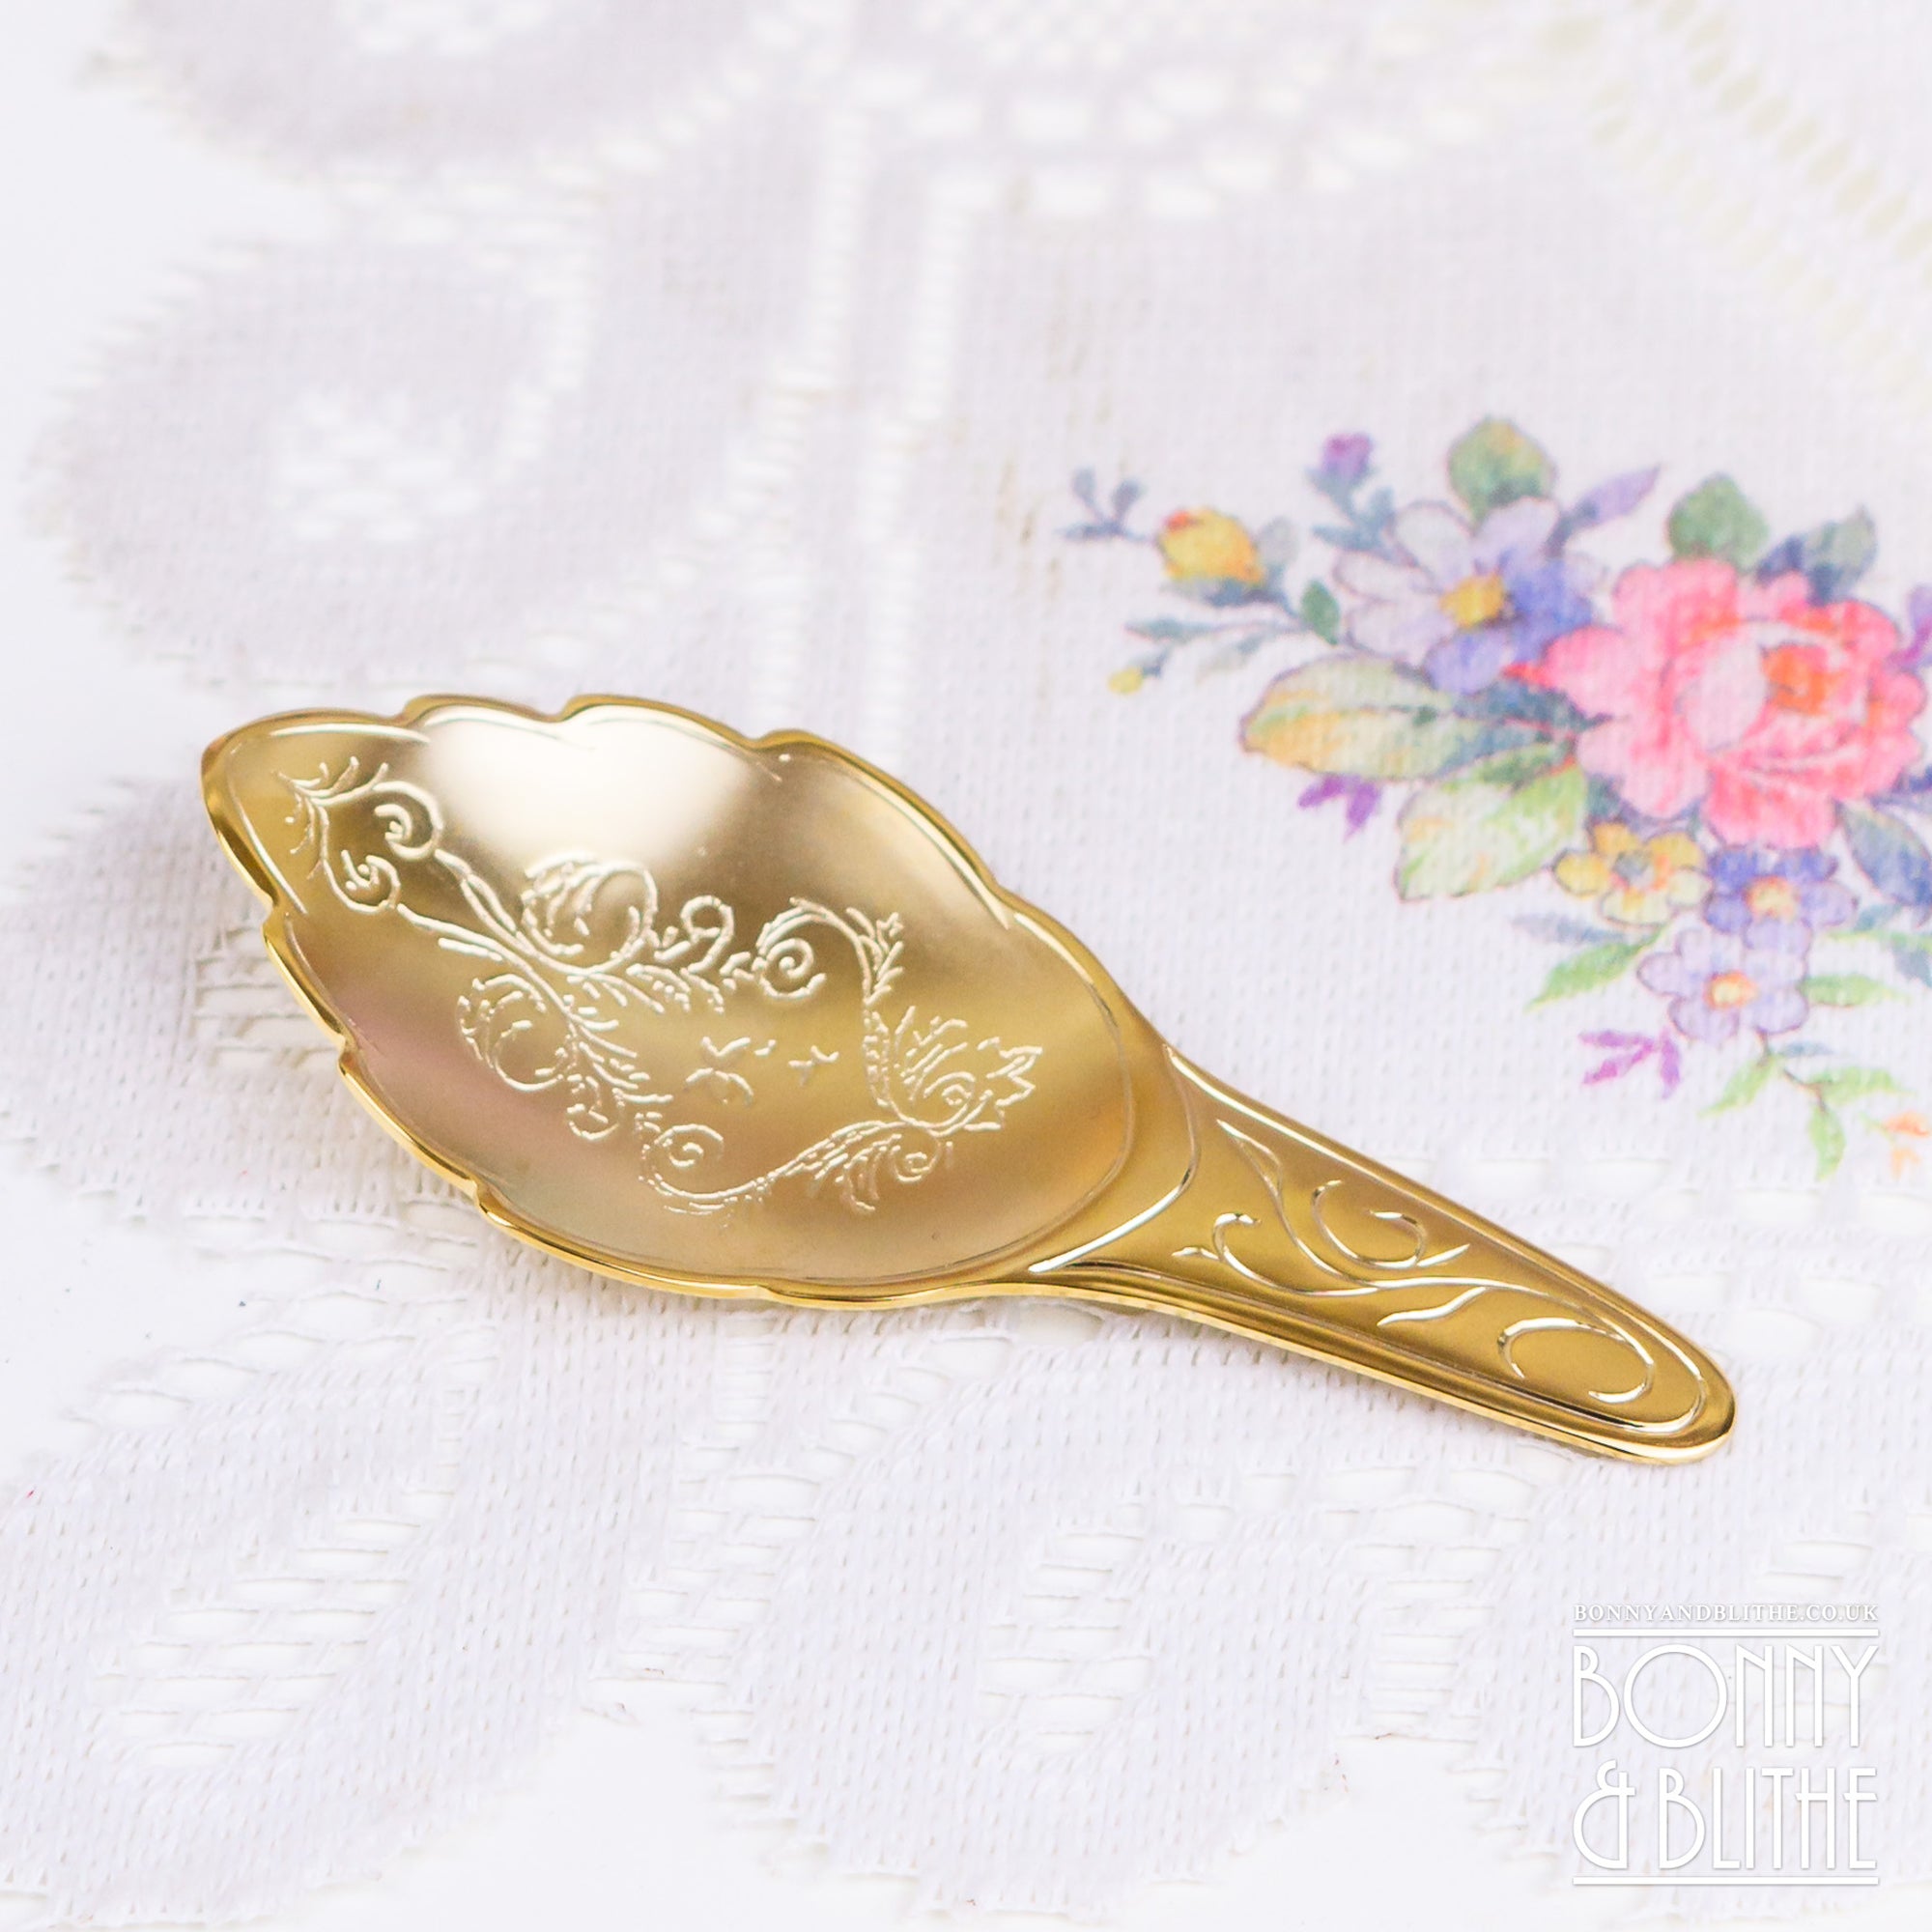 Engraved Gold Plated Tea Caddy Spoon